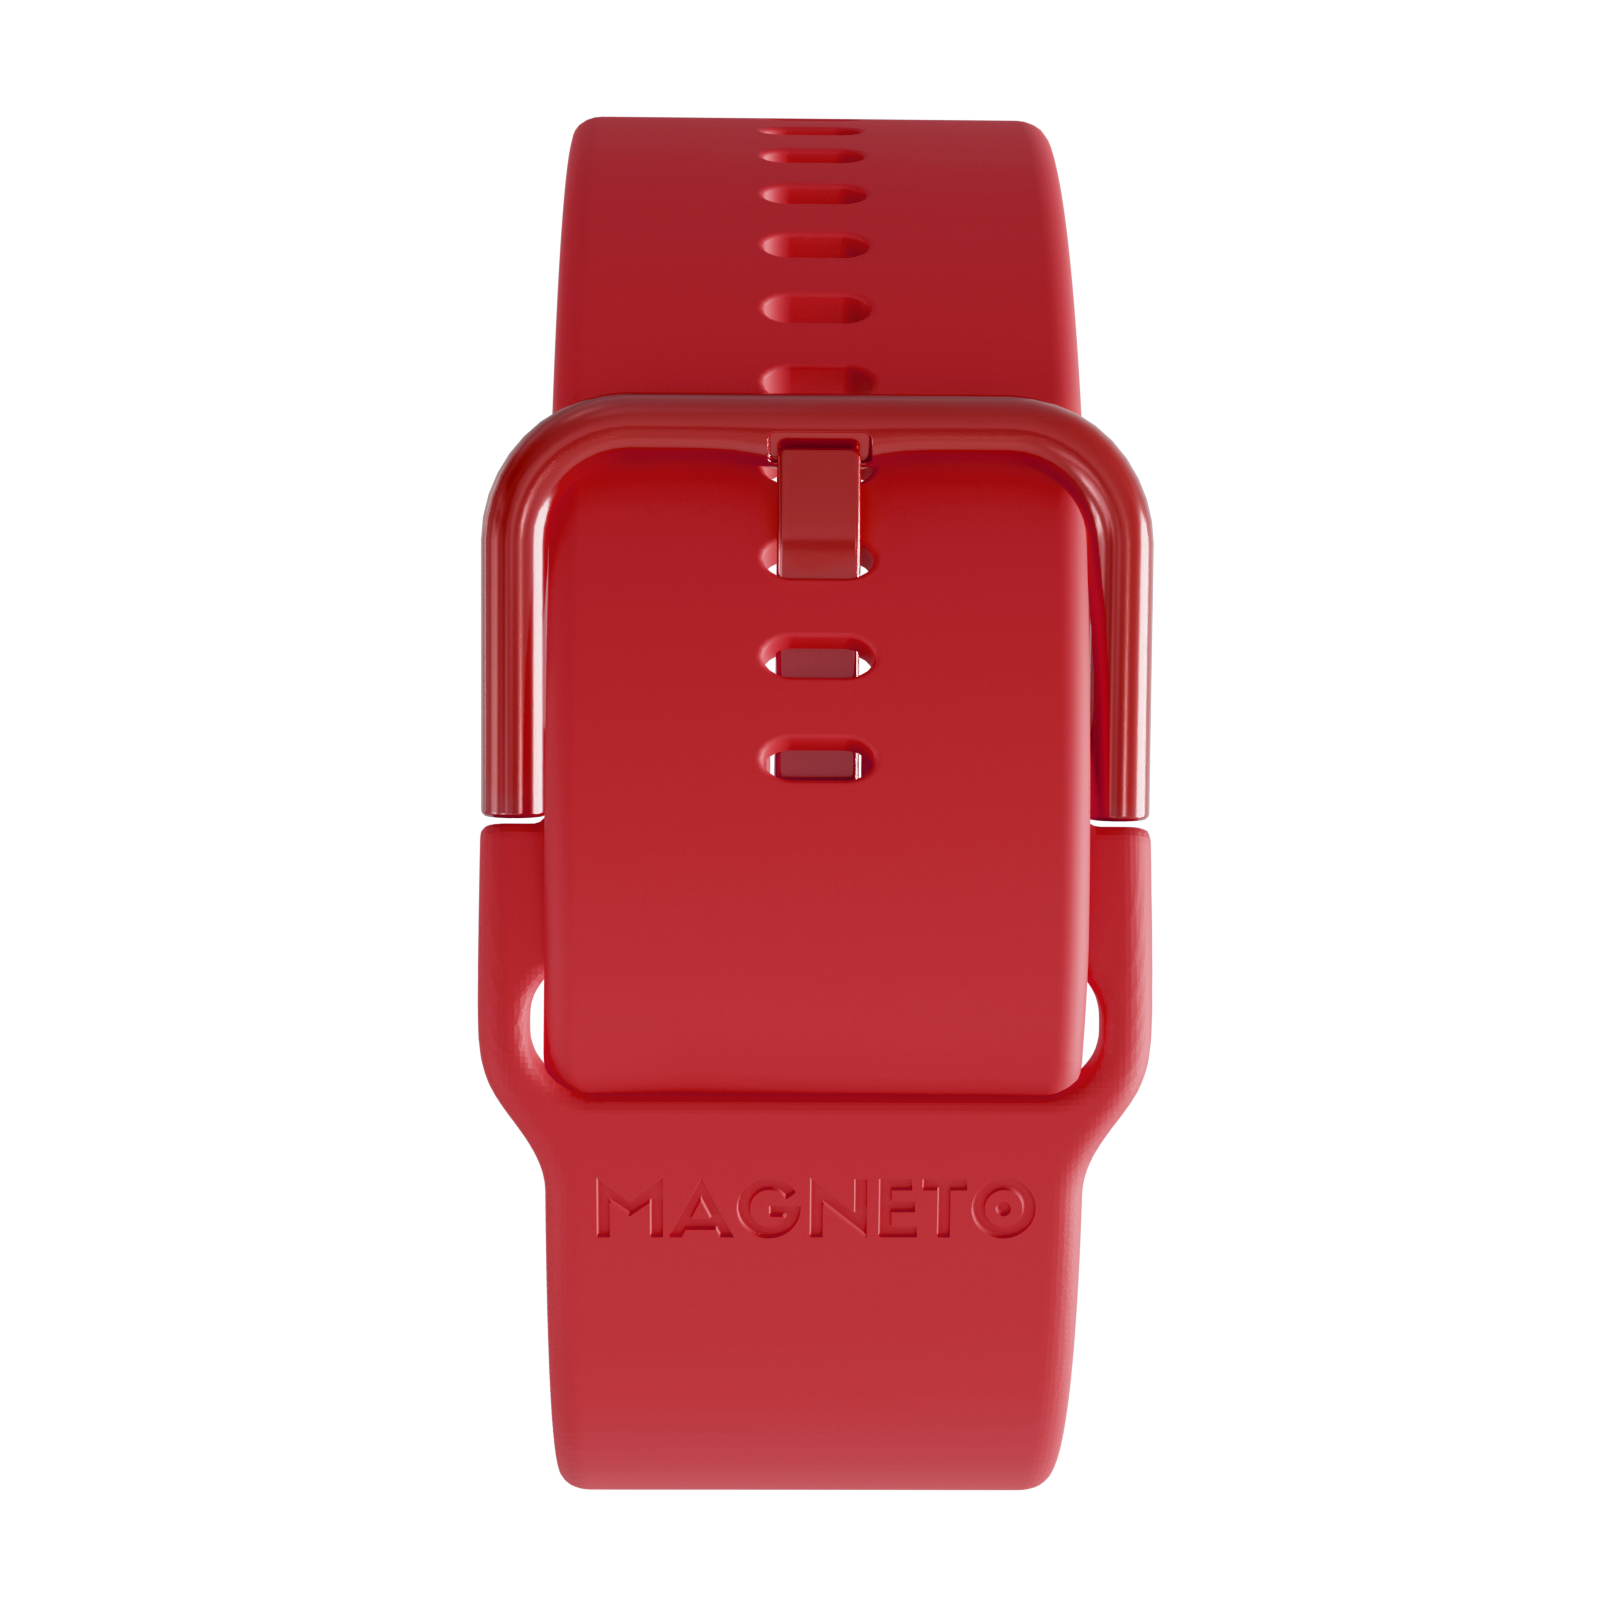 Magneto-Watch-Silikon-Rot-Front